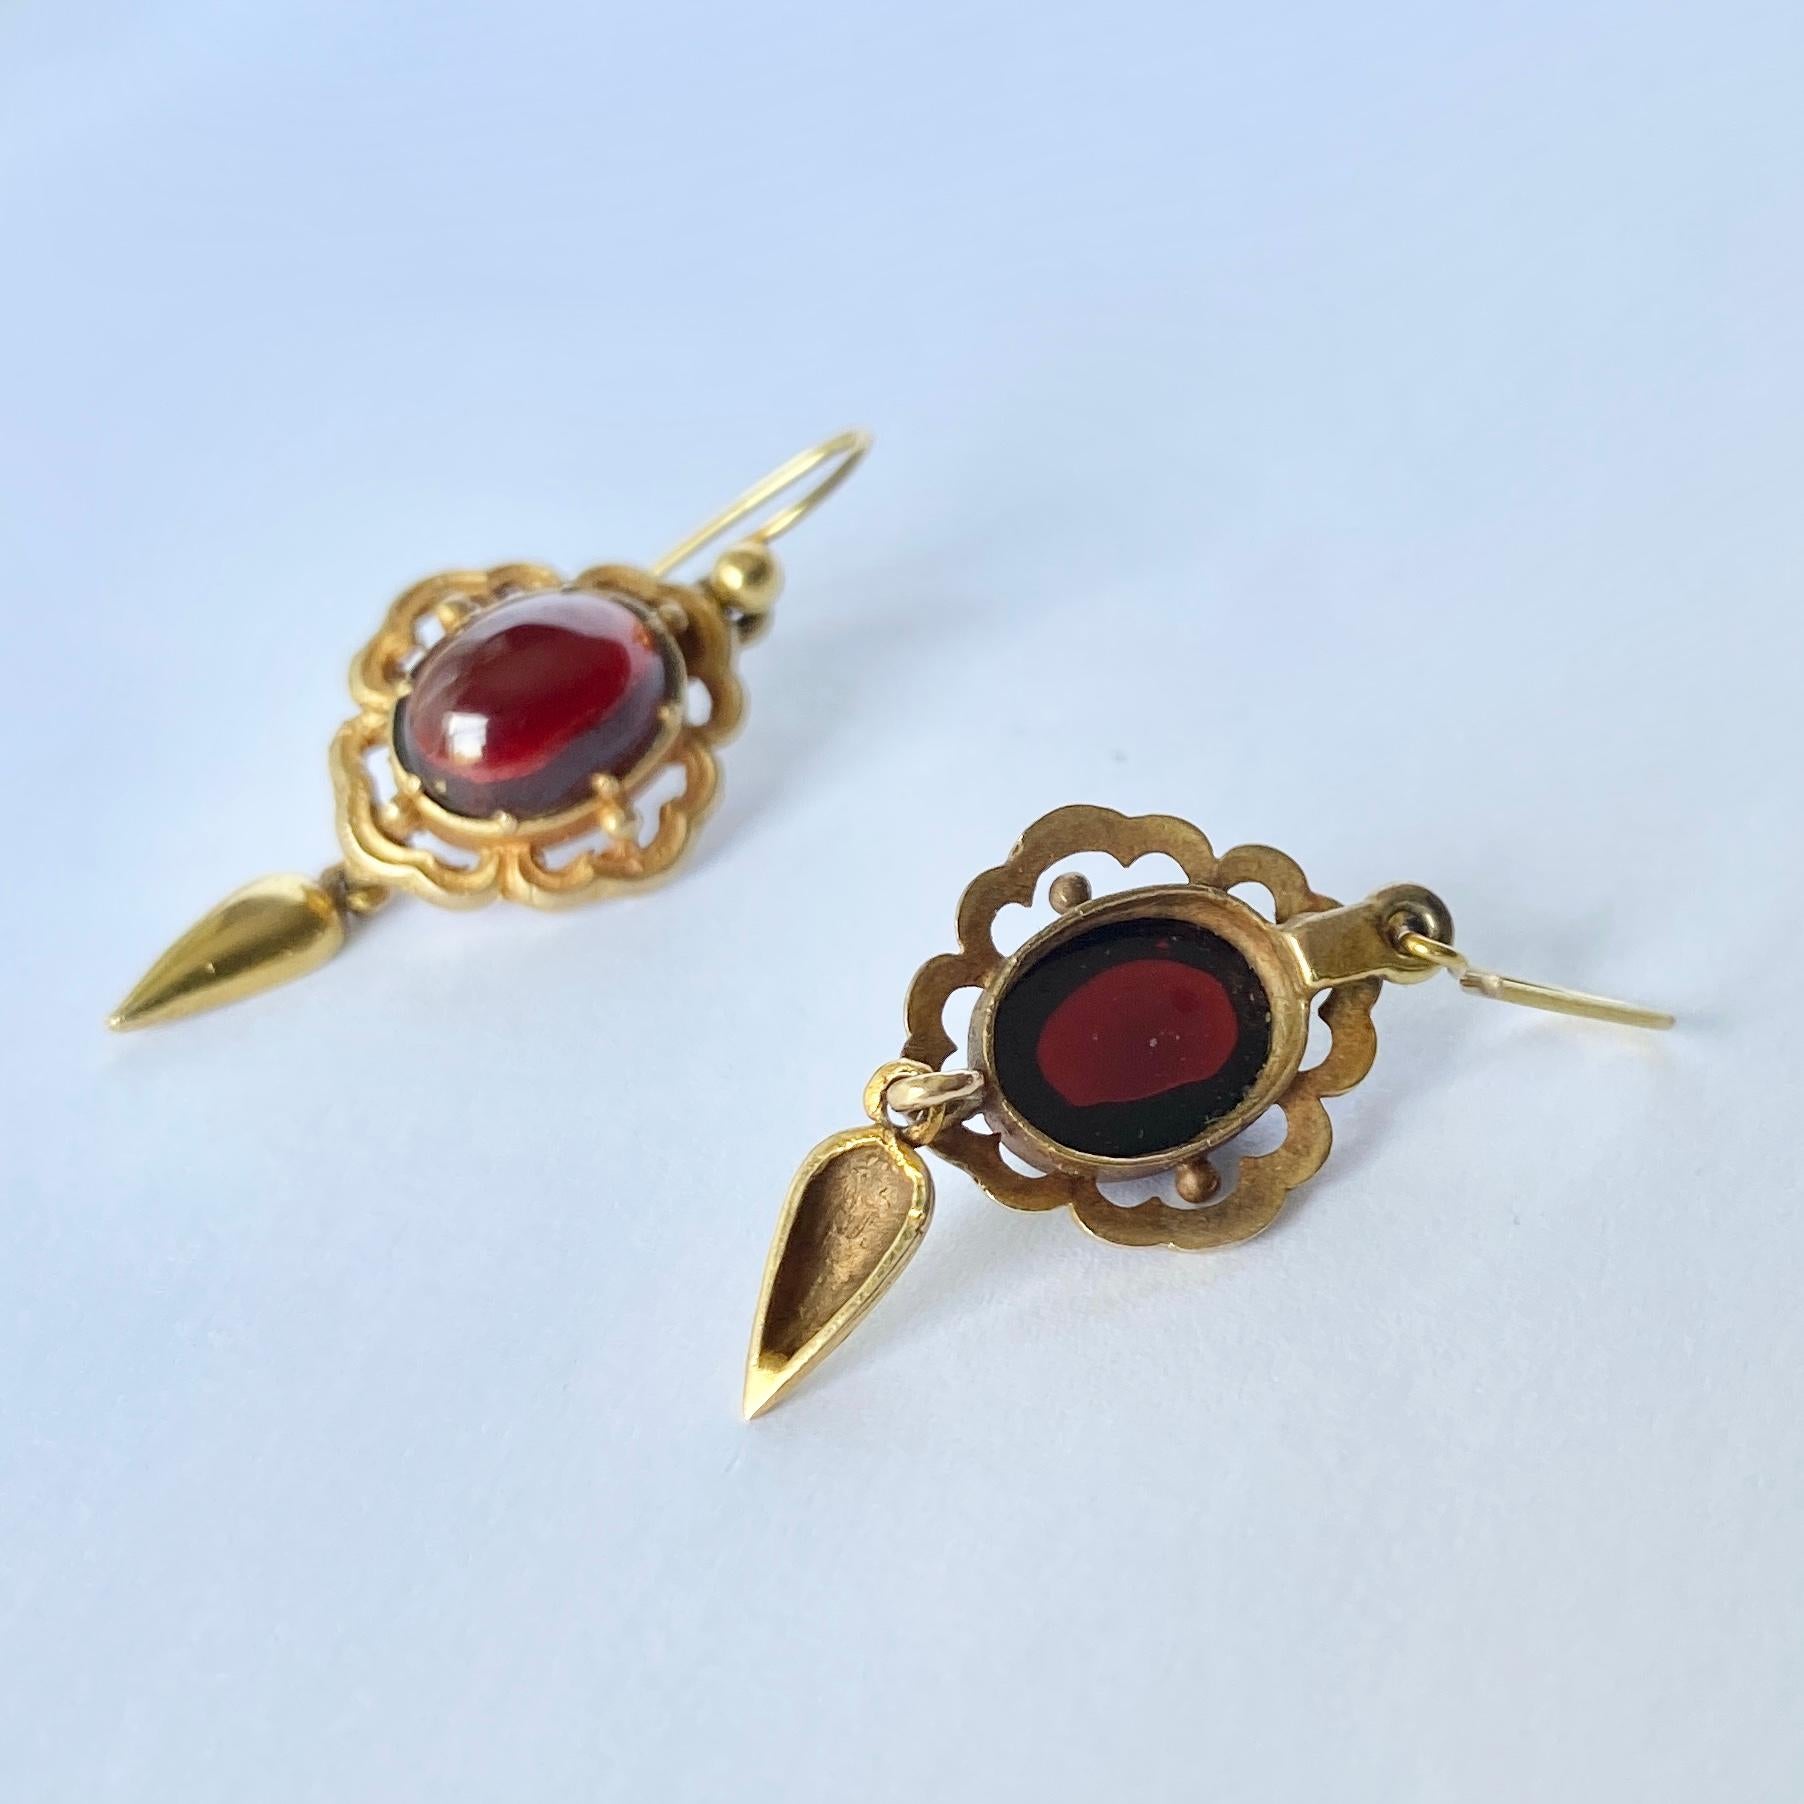 These gorgeous earrings hold smooth and glossy garnet stones set in 9carat gold. They have an ornate frame and a drop underneath.

Stone Dimensions: 8x11mm

Weight: 4.7g